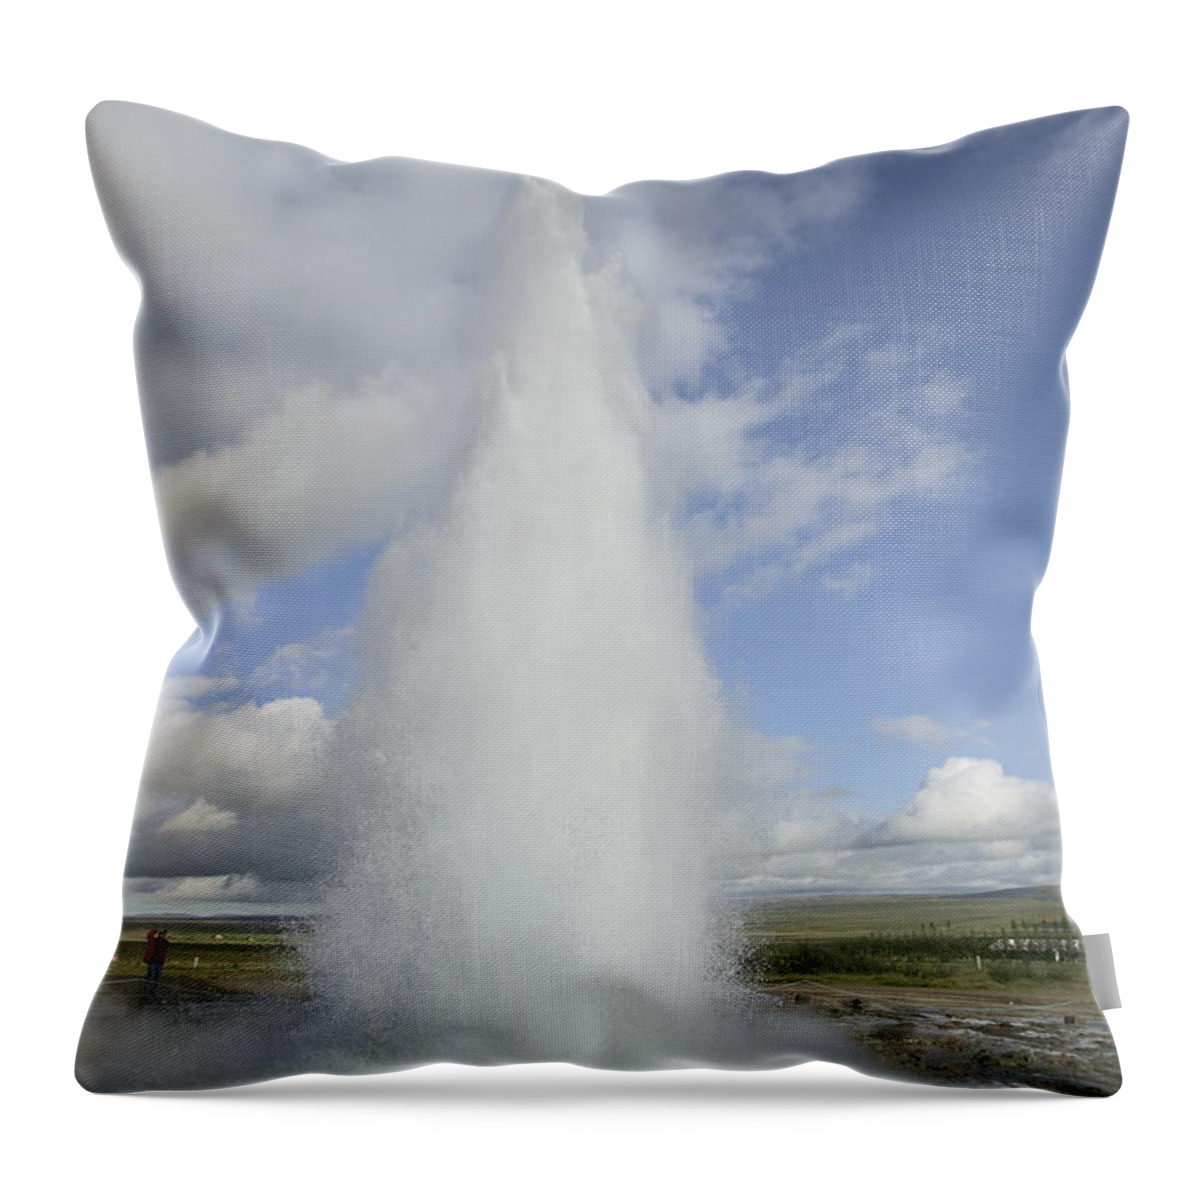 Erupting Throw Pillow featuring the photograph Geyser Erupting 20 Meters High Every 8 by Cyril Ruoso